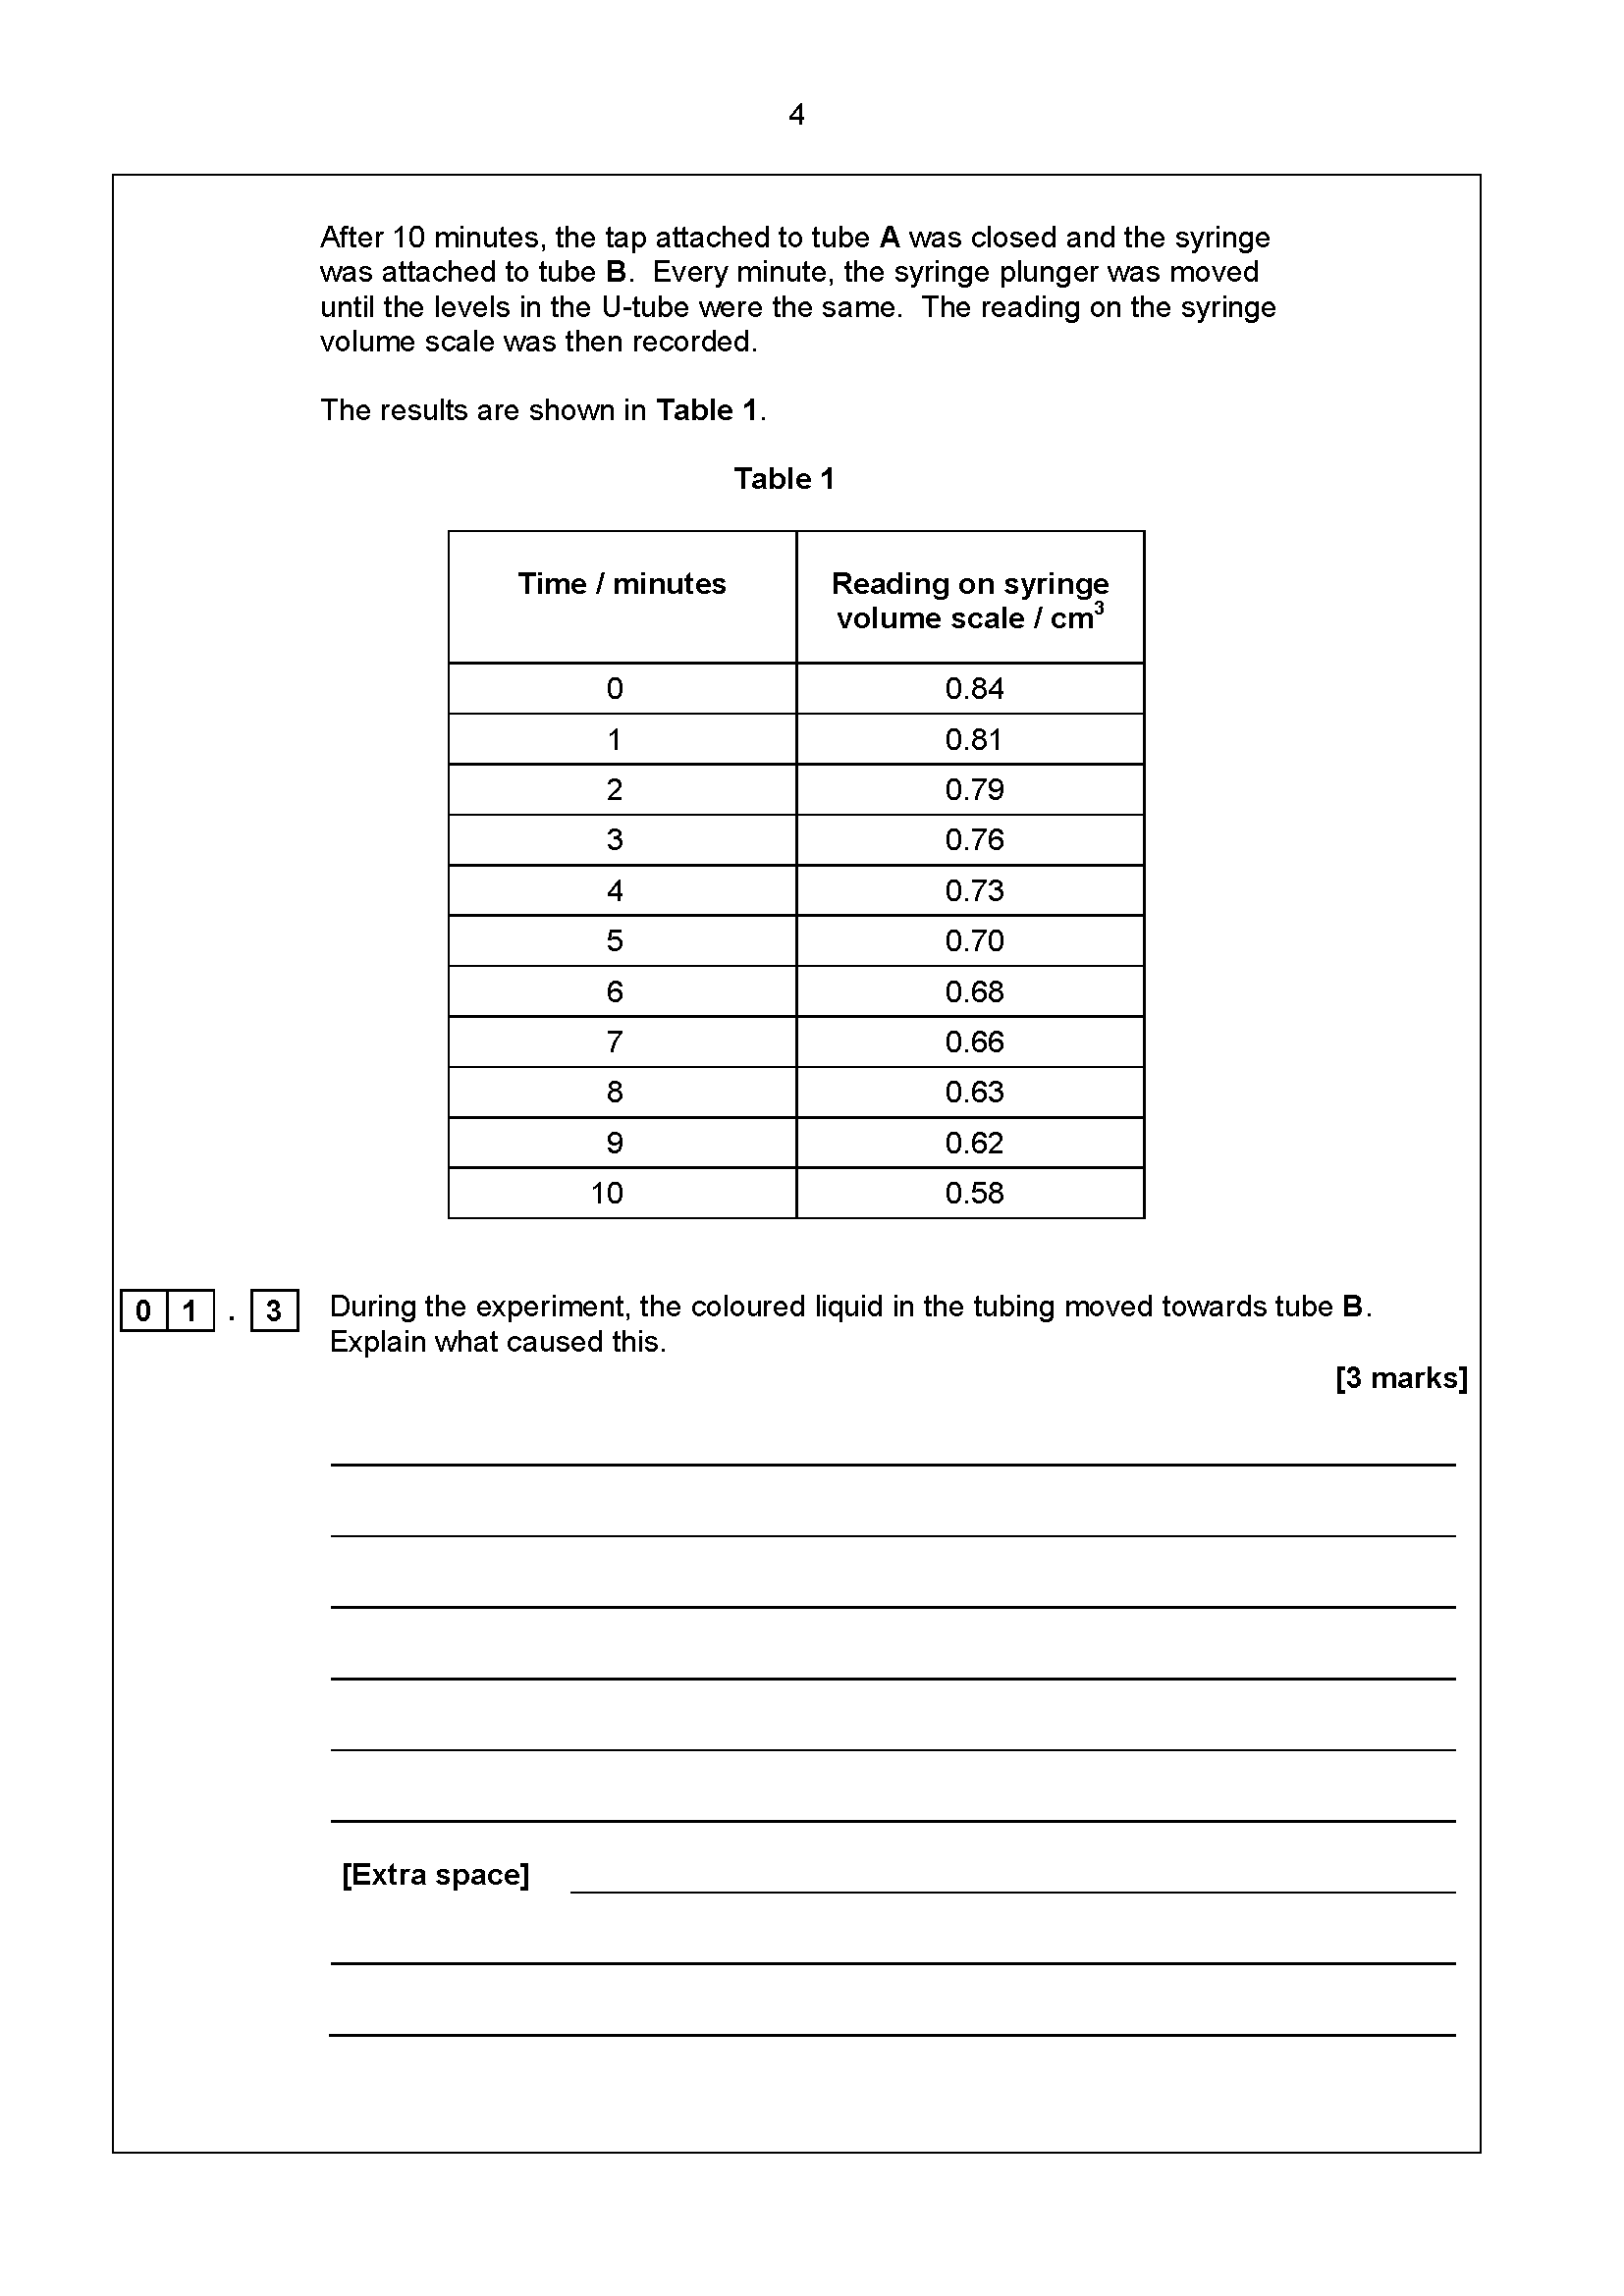 calculationquestionsAQA_Page_04.png